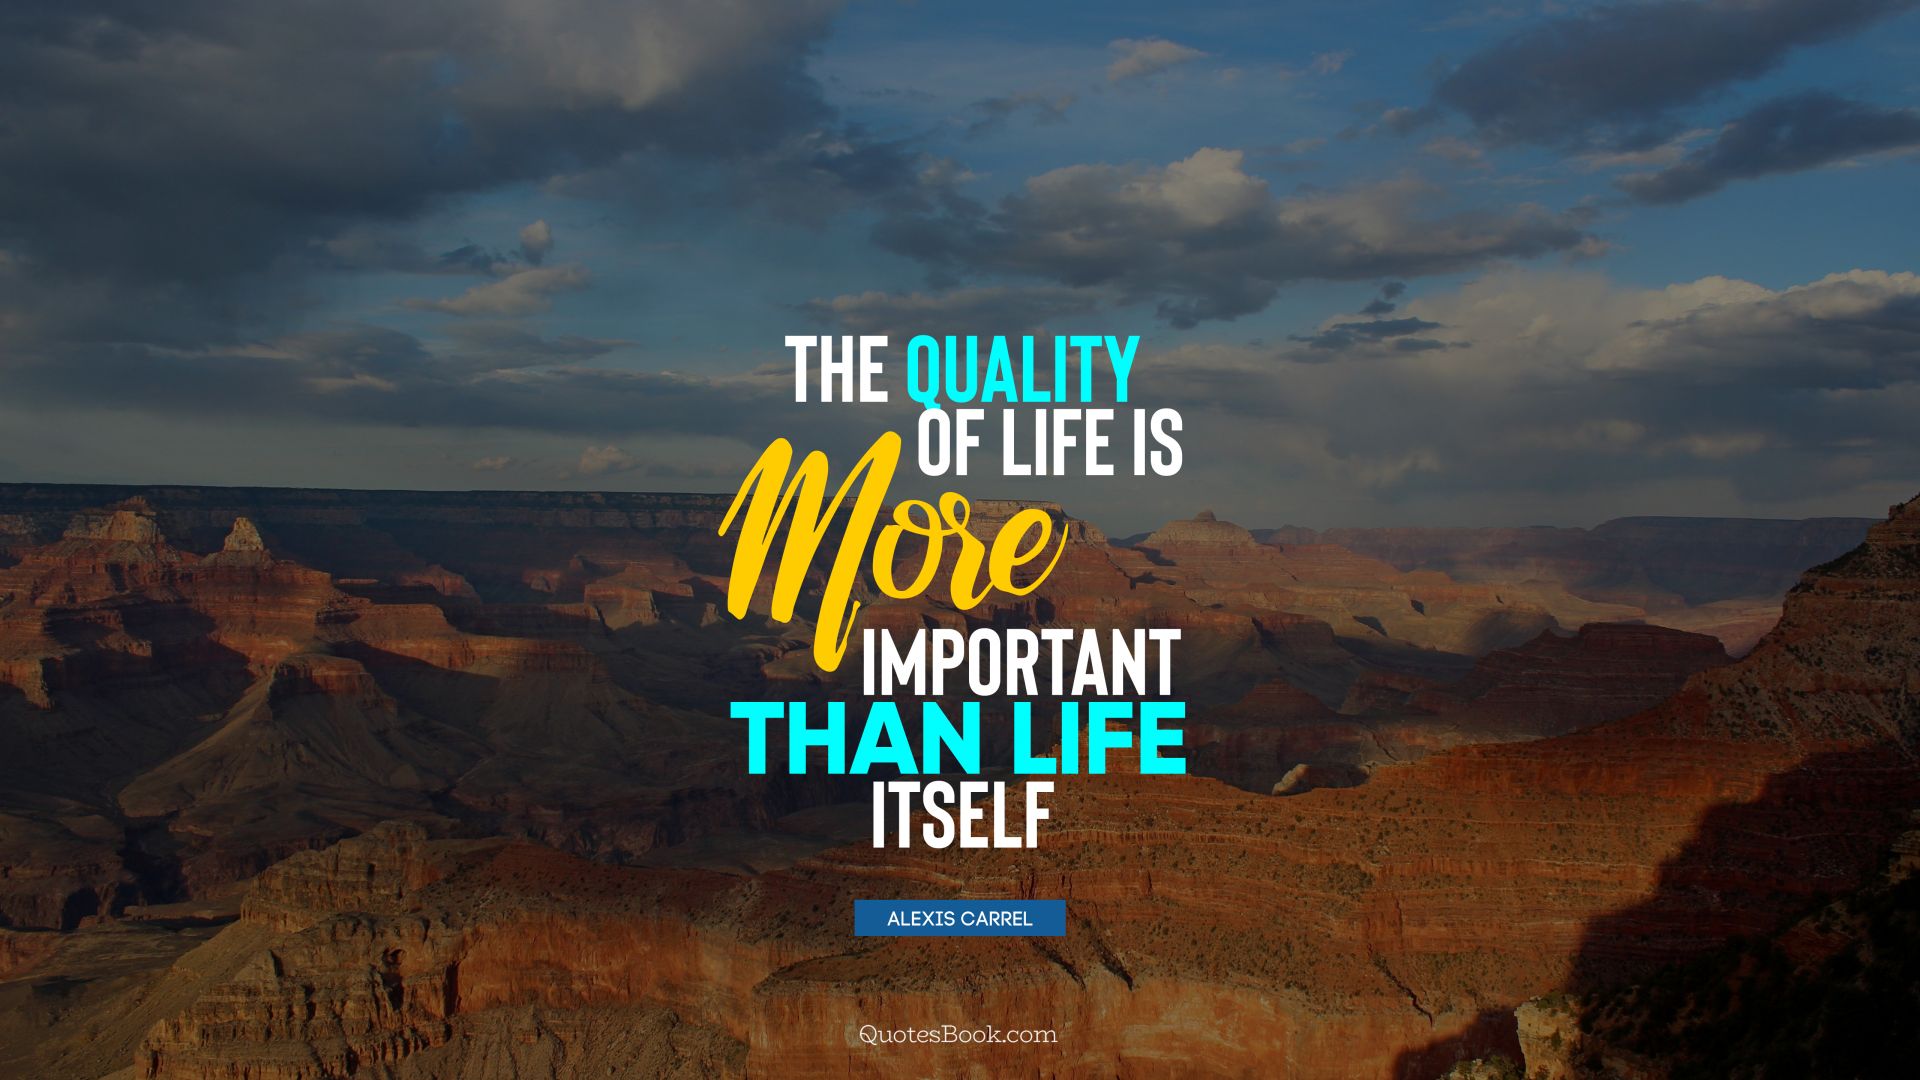 The quality of life is more important than life itself. - Quote by Alexis Carrel